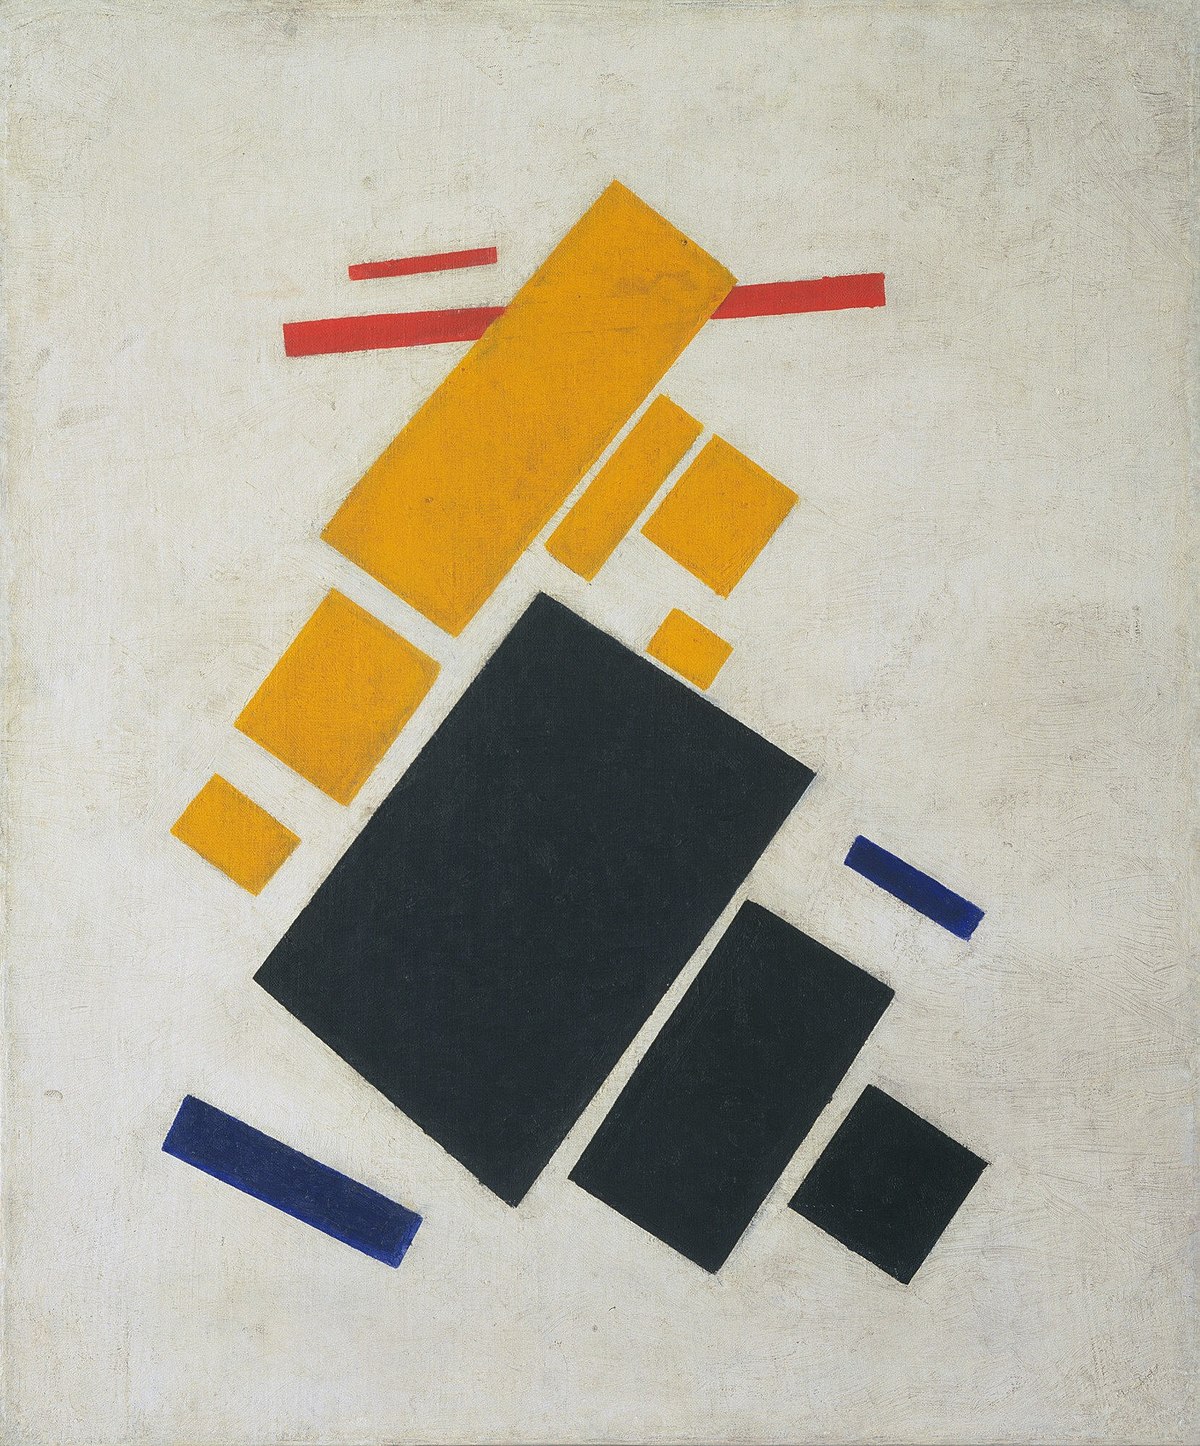 Datei:Suprematist Composition - Airplane Flying (Malevich ...